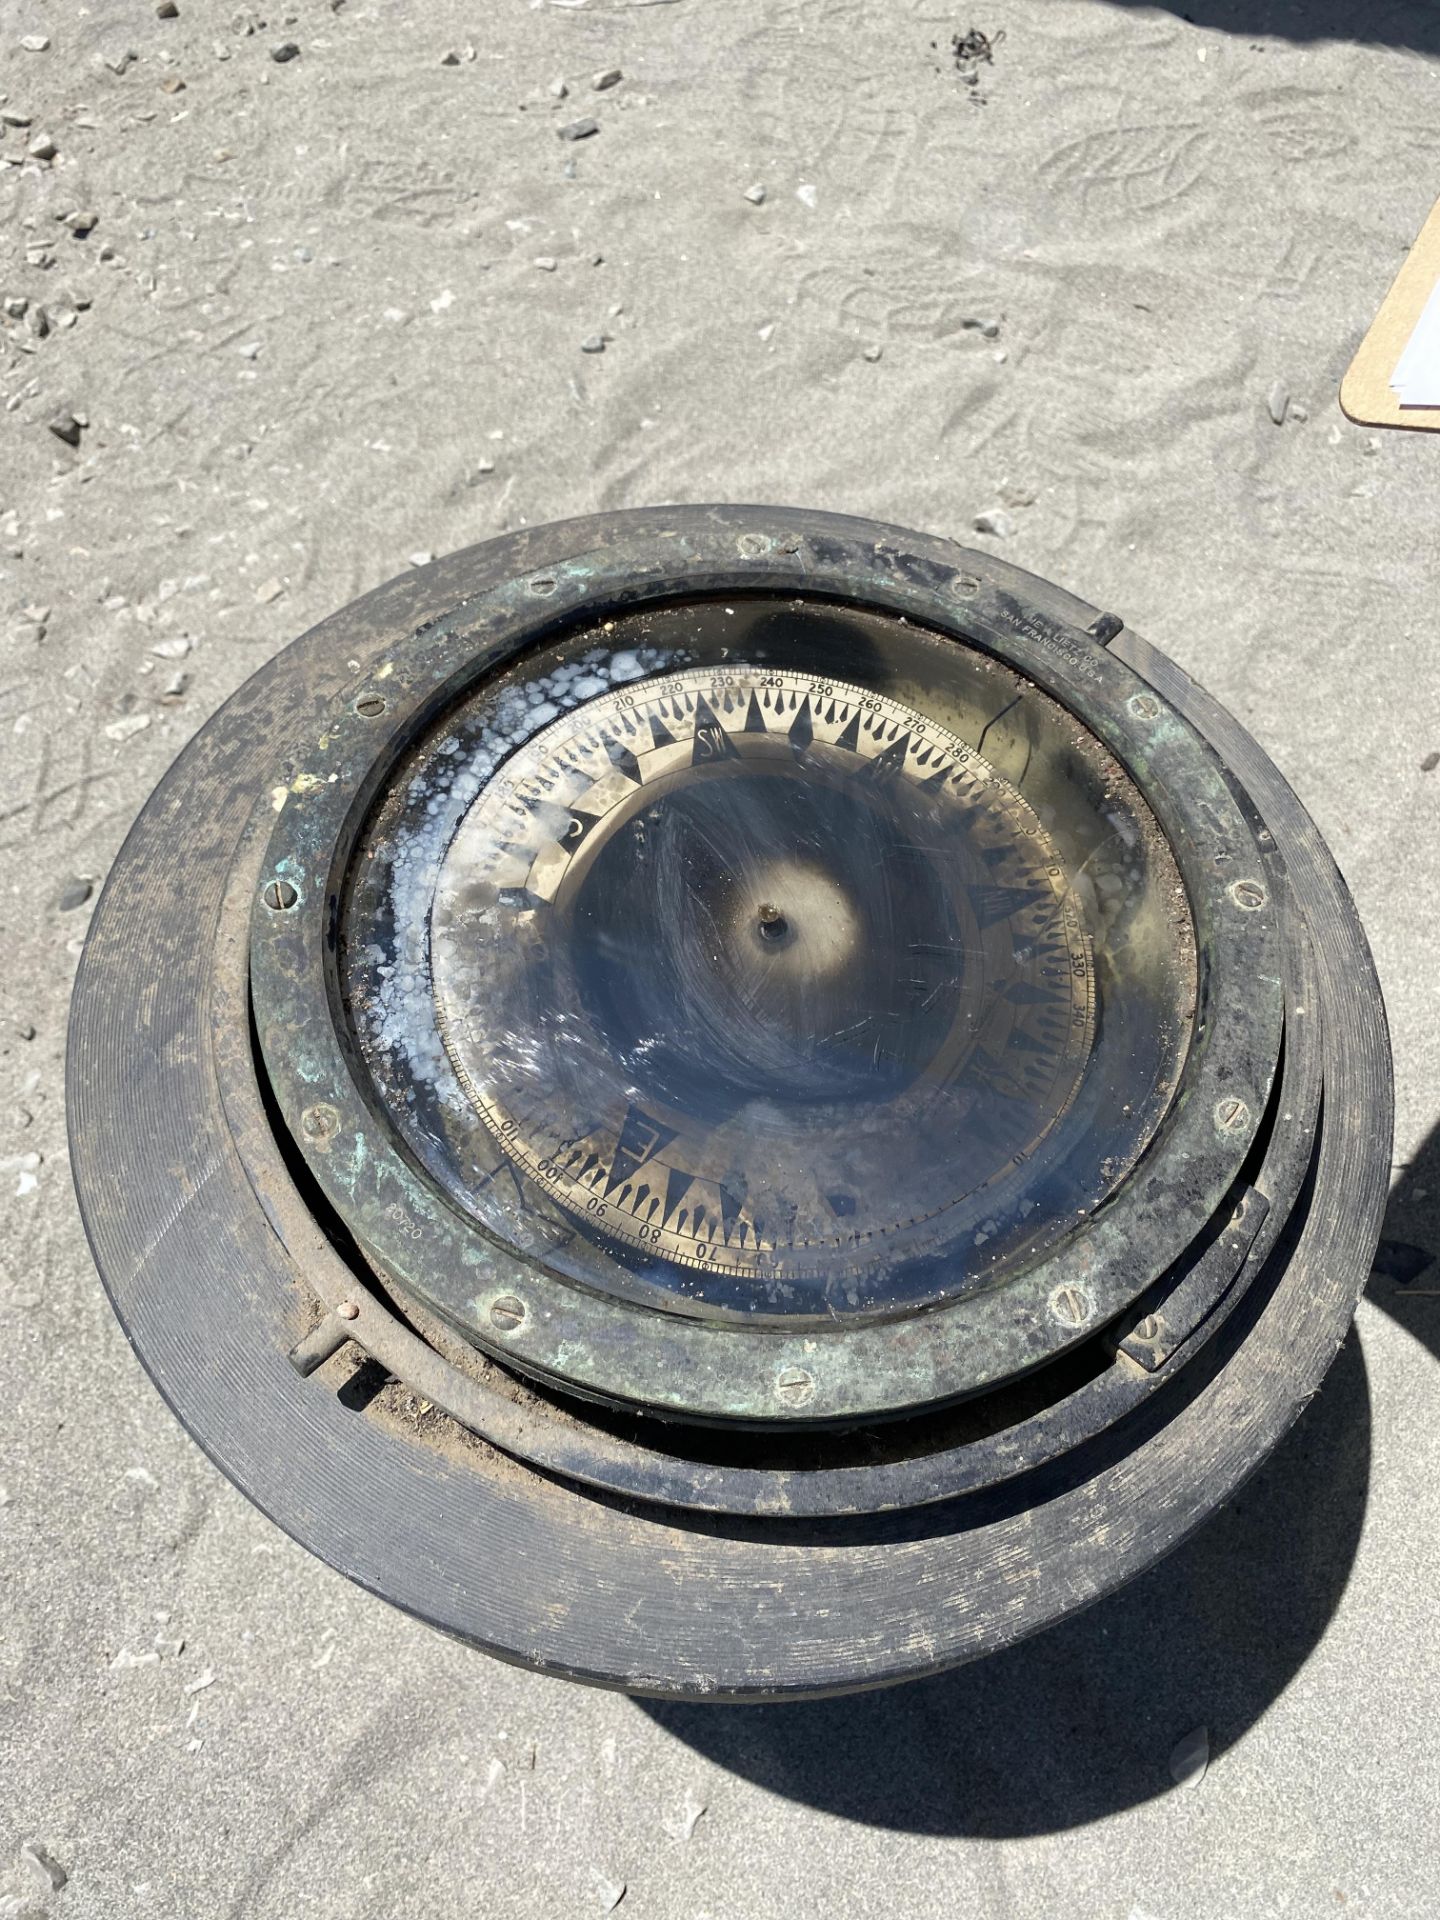 Antique Leitz San Francisco Oil Filled Compass (Whale Oil), 8" Dial w/Brass Trim - Image 3 of 6